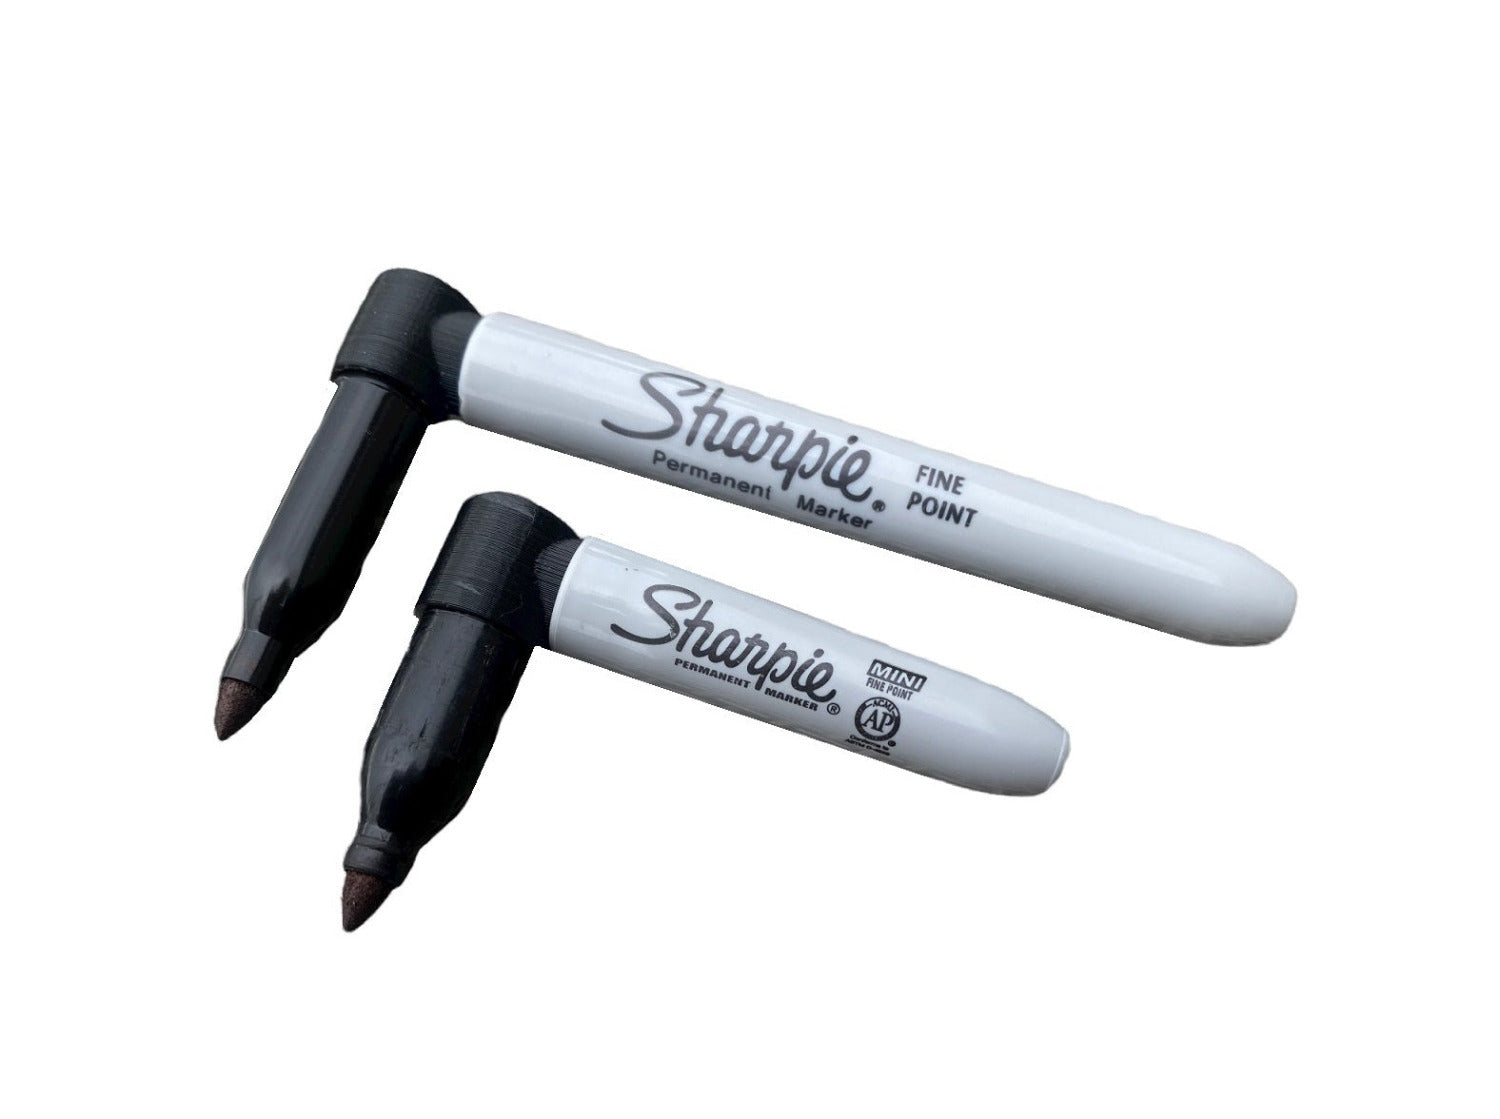 (5) Right Angle Sharpie Adapters